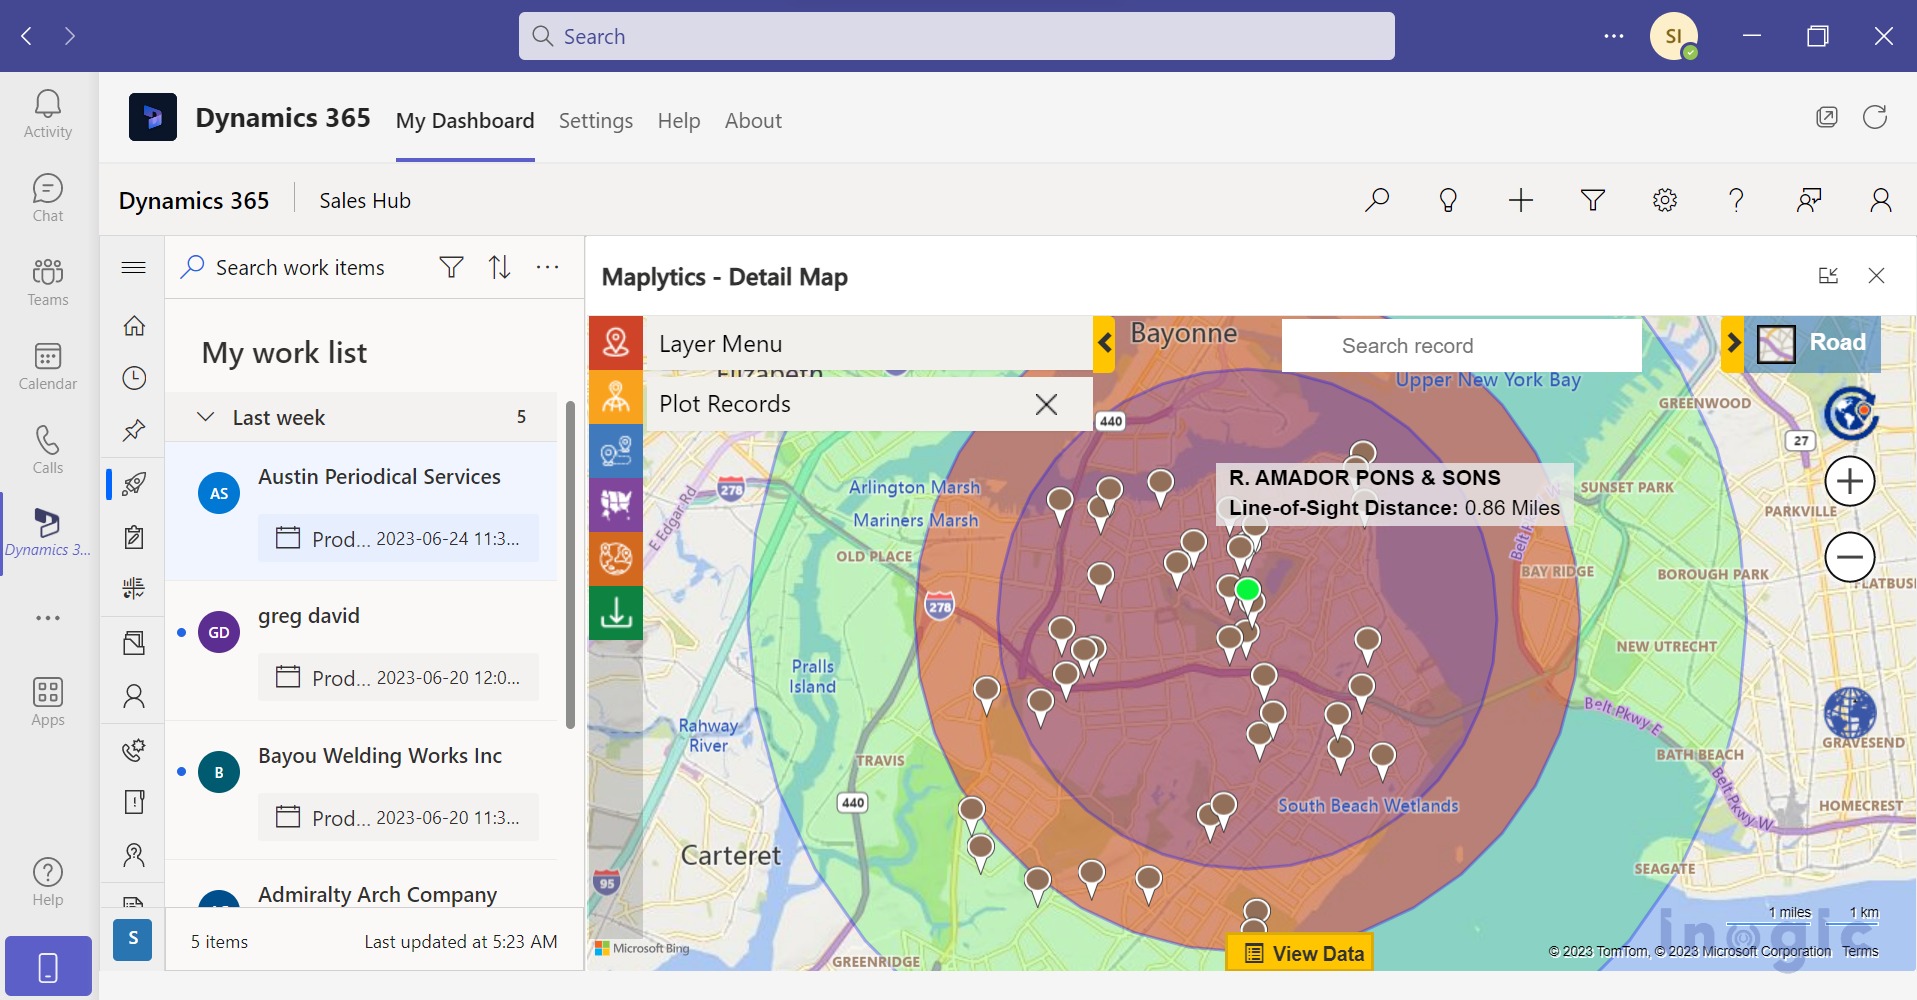 Dynamics 365 App and Maps integrated with Teams